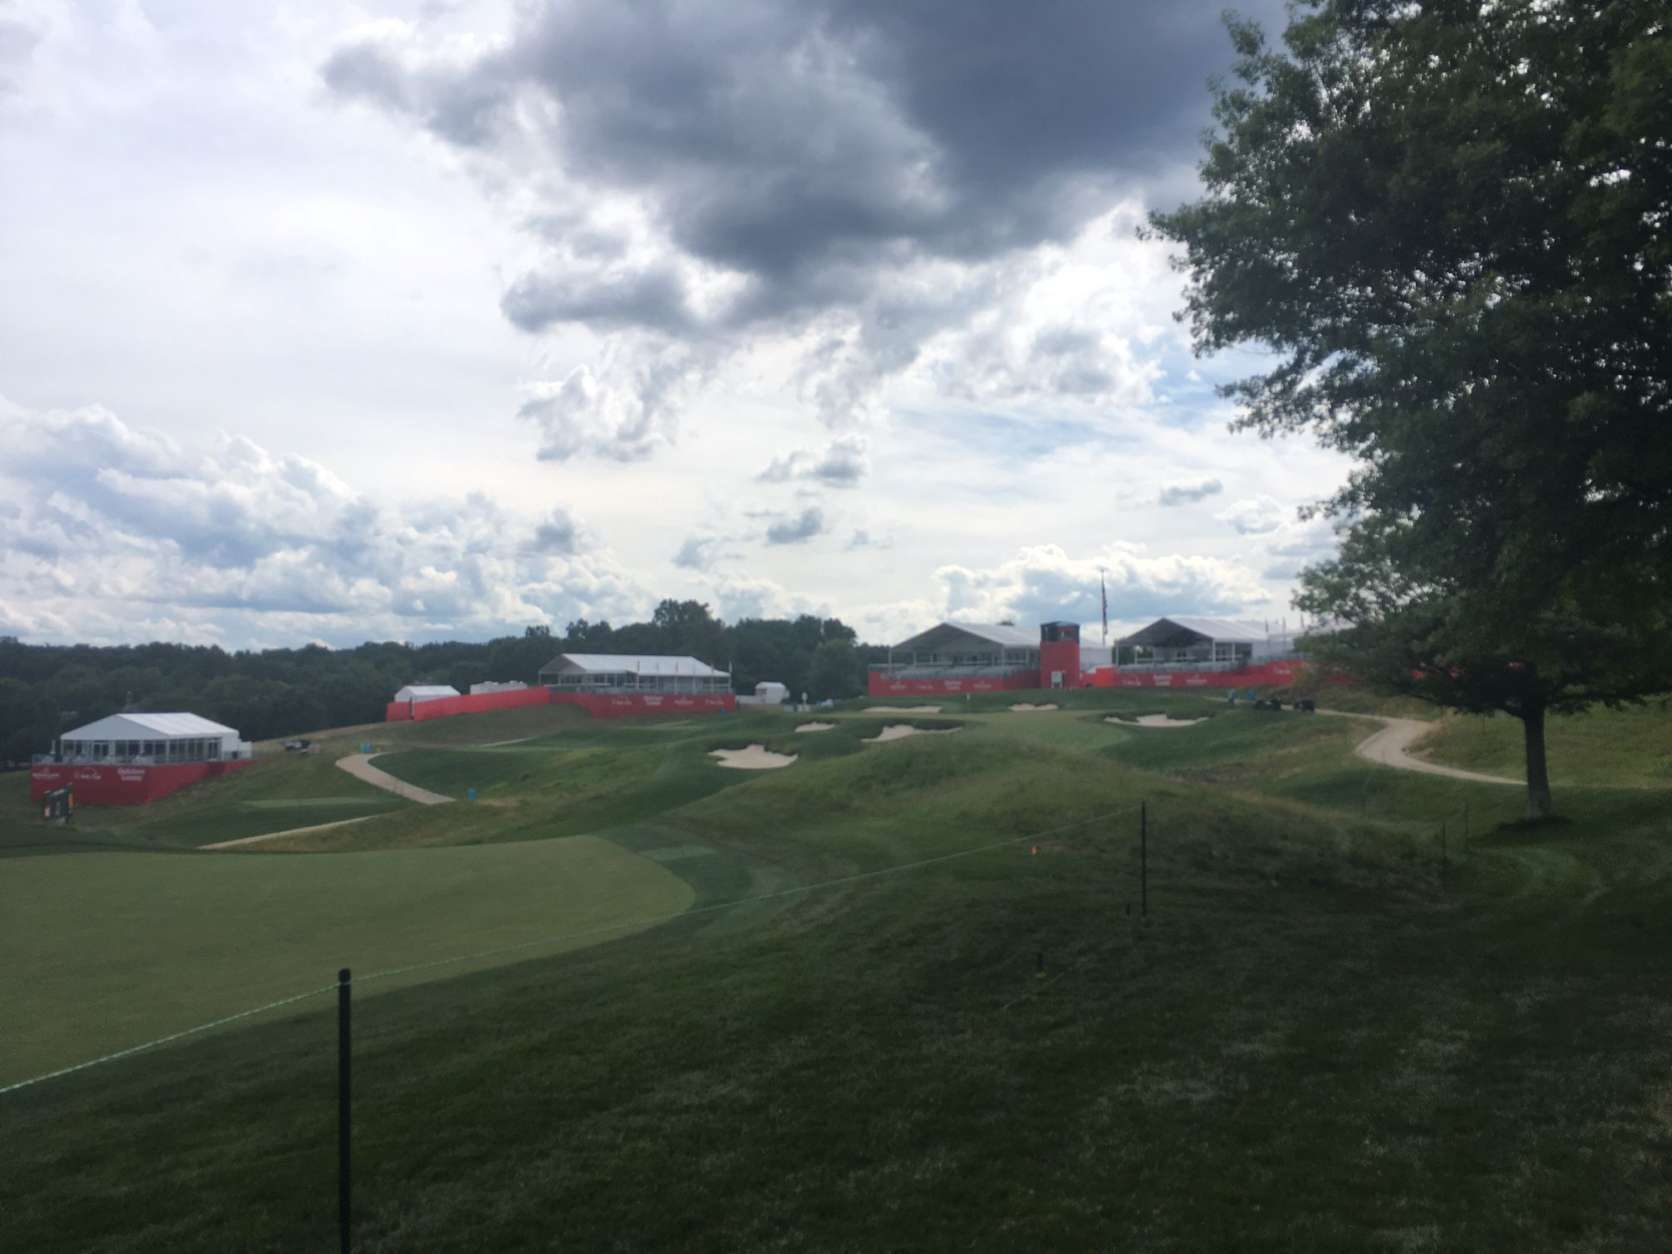 The finishing three holes are both dramatic and bound to be popular spots, starting with the heavily bunkered approach into the granstand bowl at 16. (WTOP/Noah Frank)